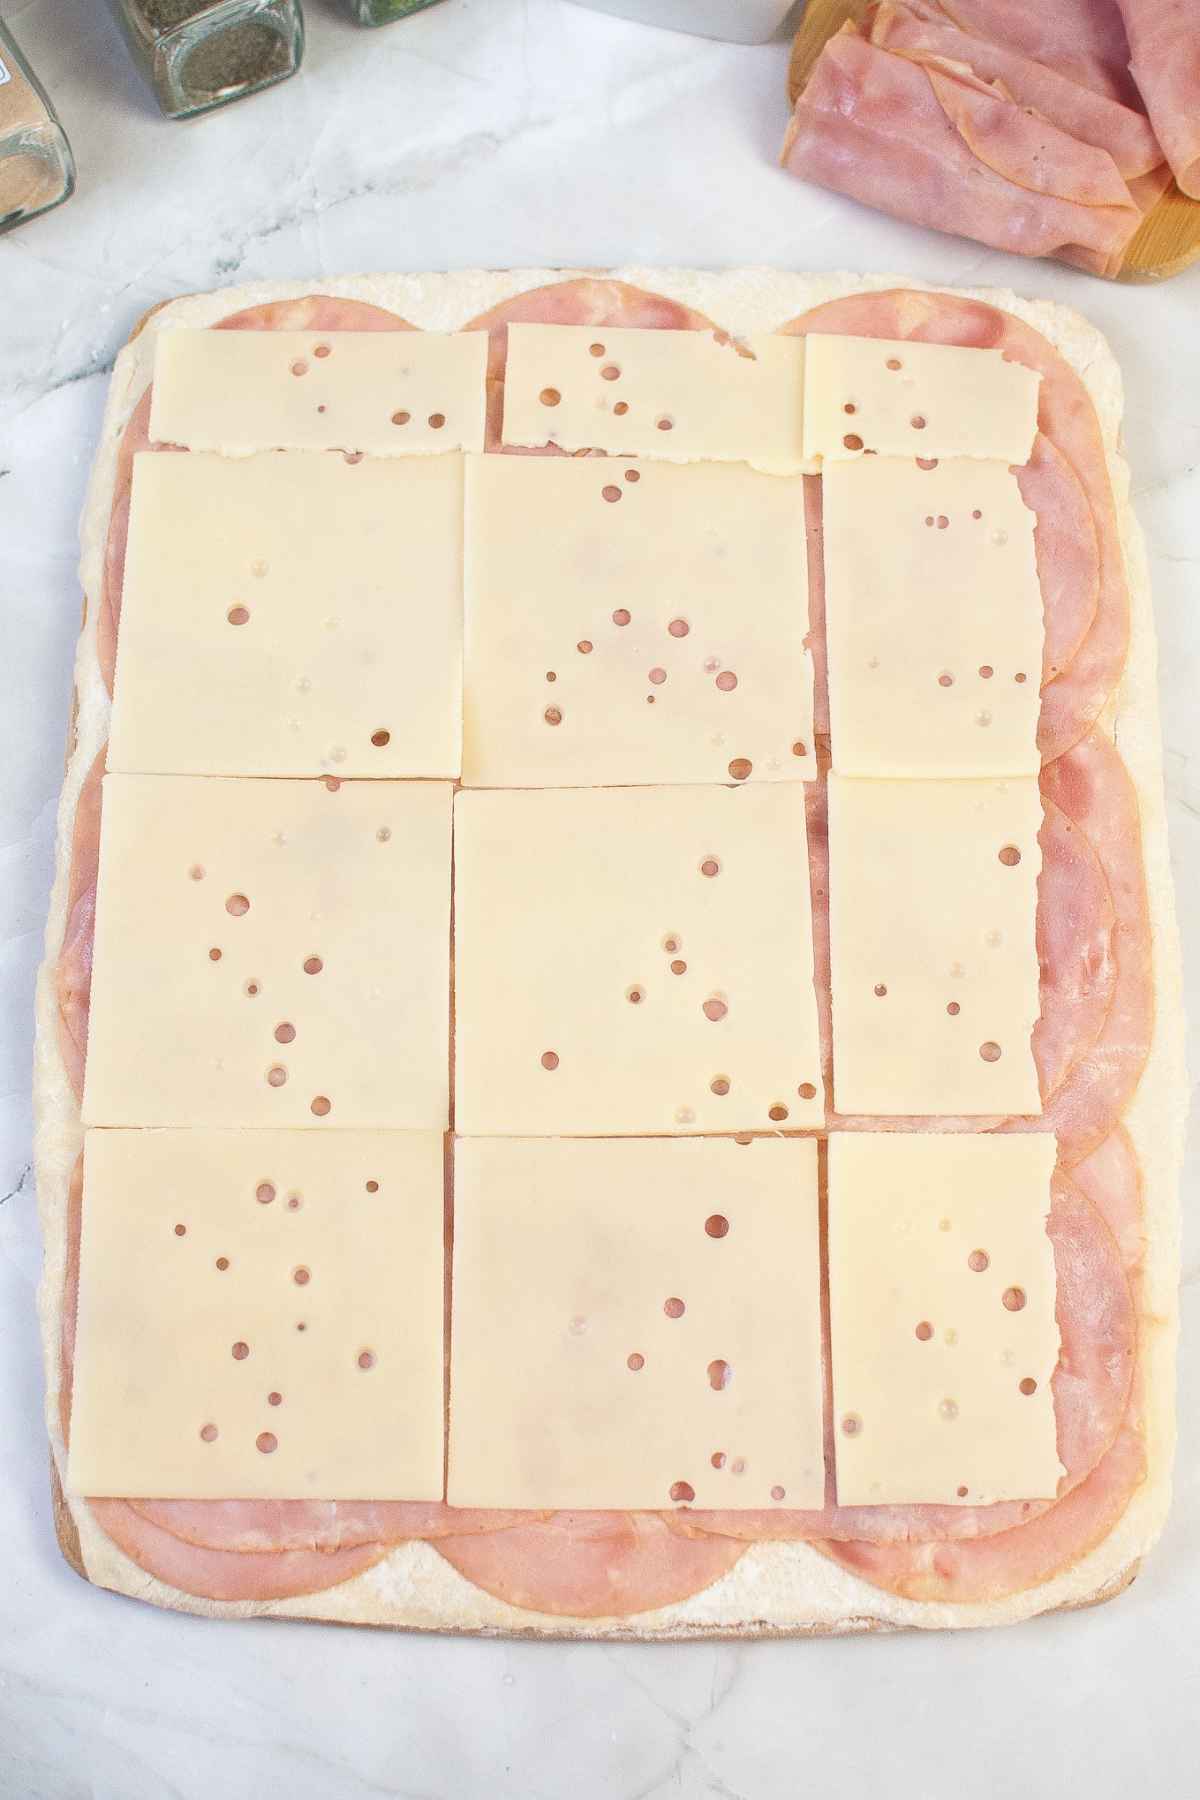 Layers of ham and cheese on pastry dough.